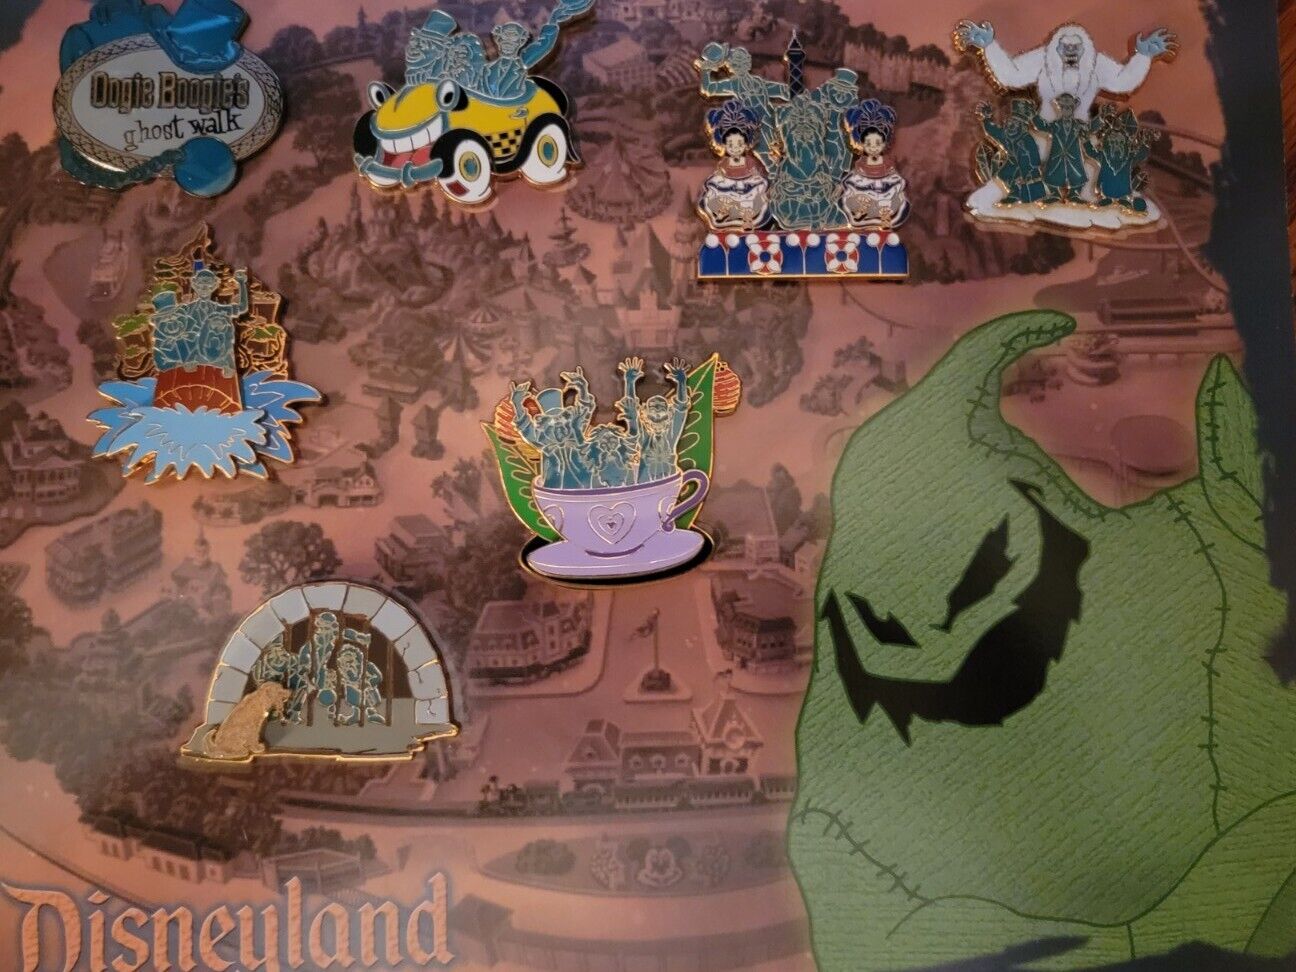 RARE Disney Oogie Boogie Ghost Walk Full LE 7 Pin Set Attached To Map